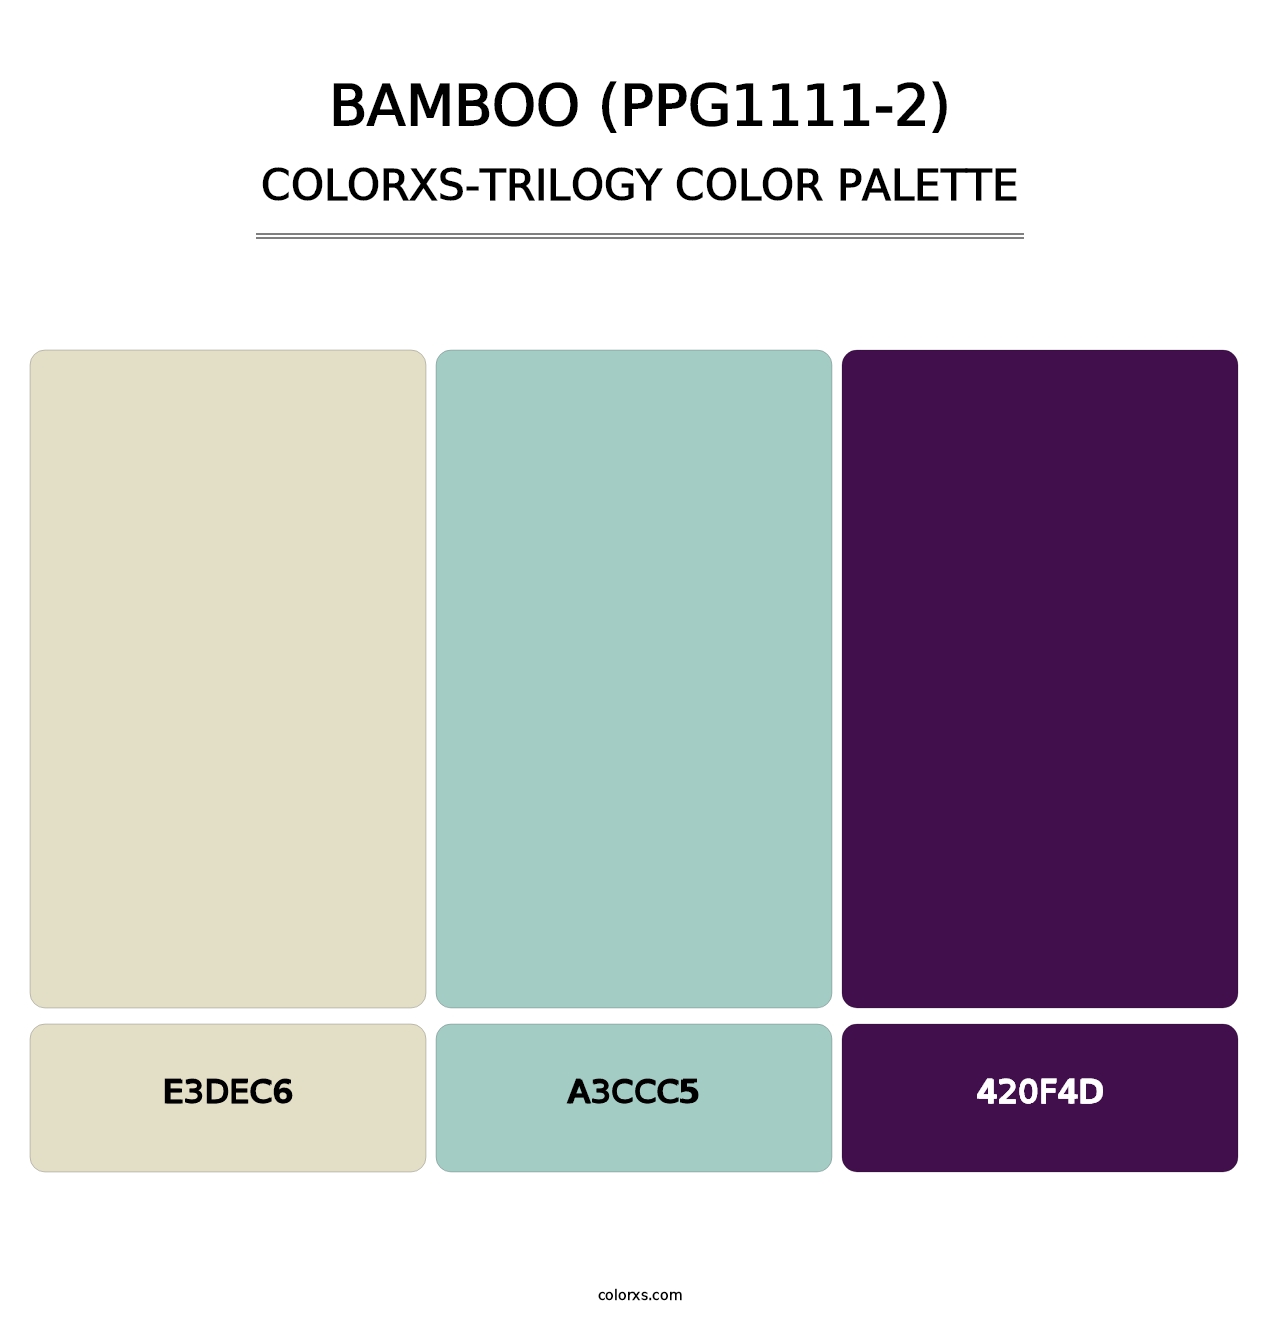 Bamboo (PPG1111-2) - Colorxs Trilogy Palette